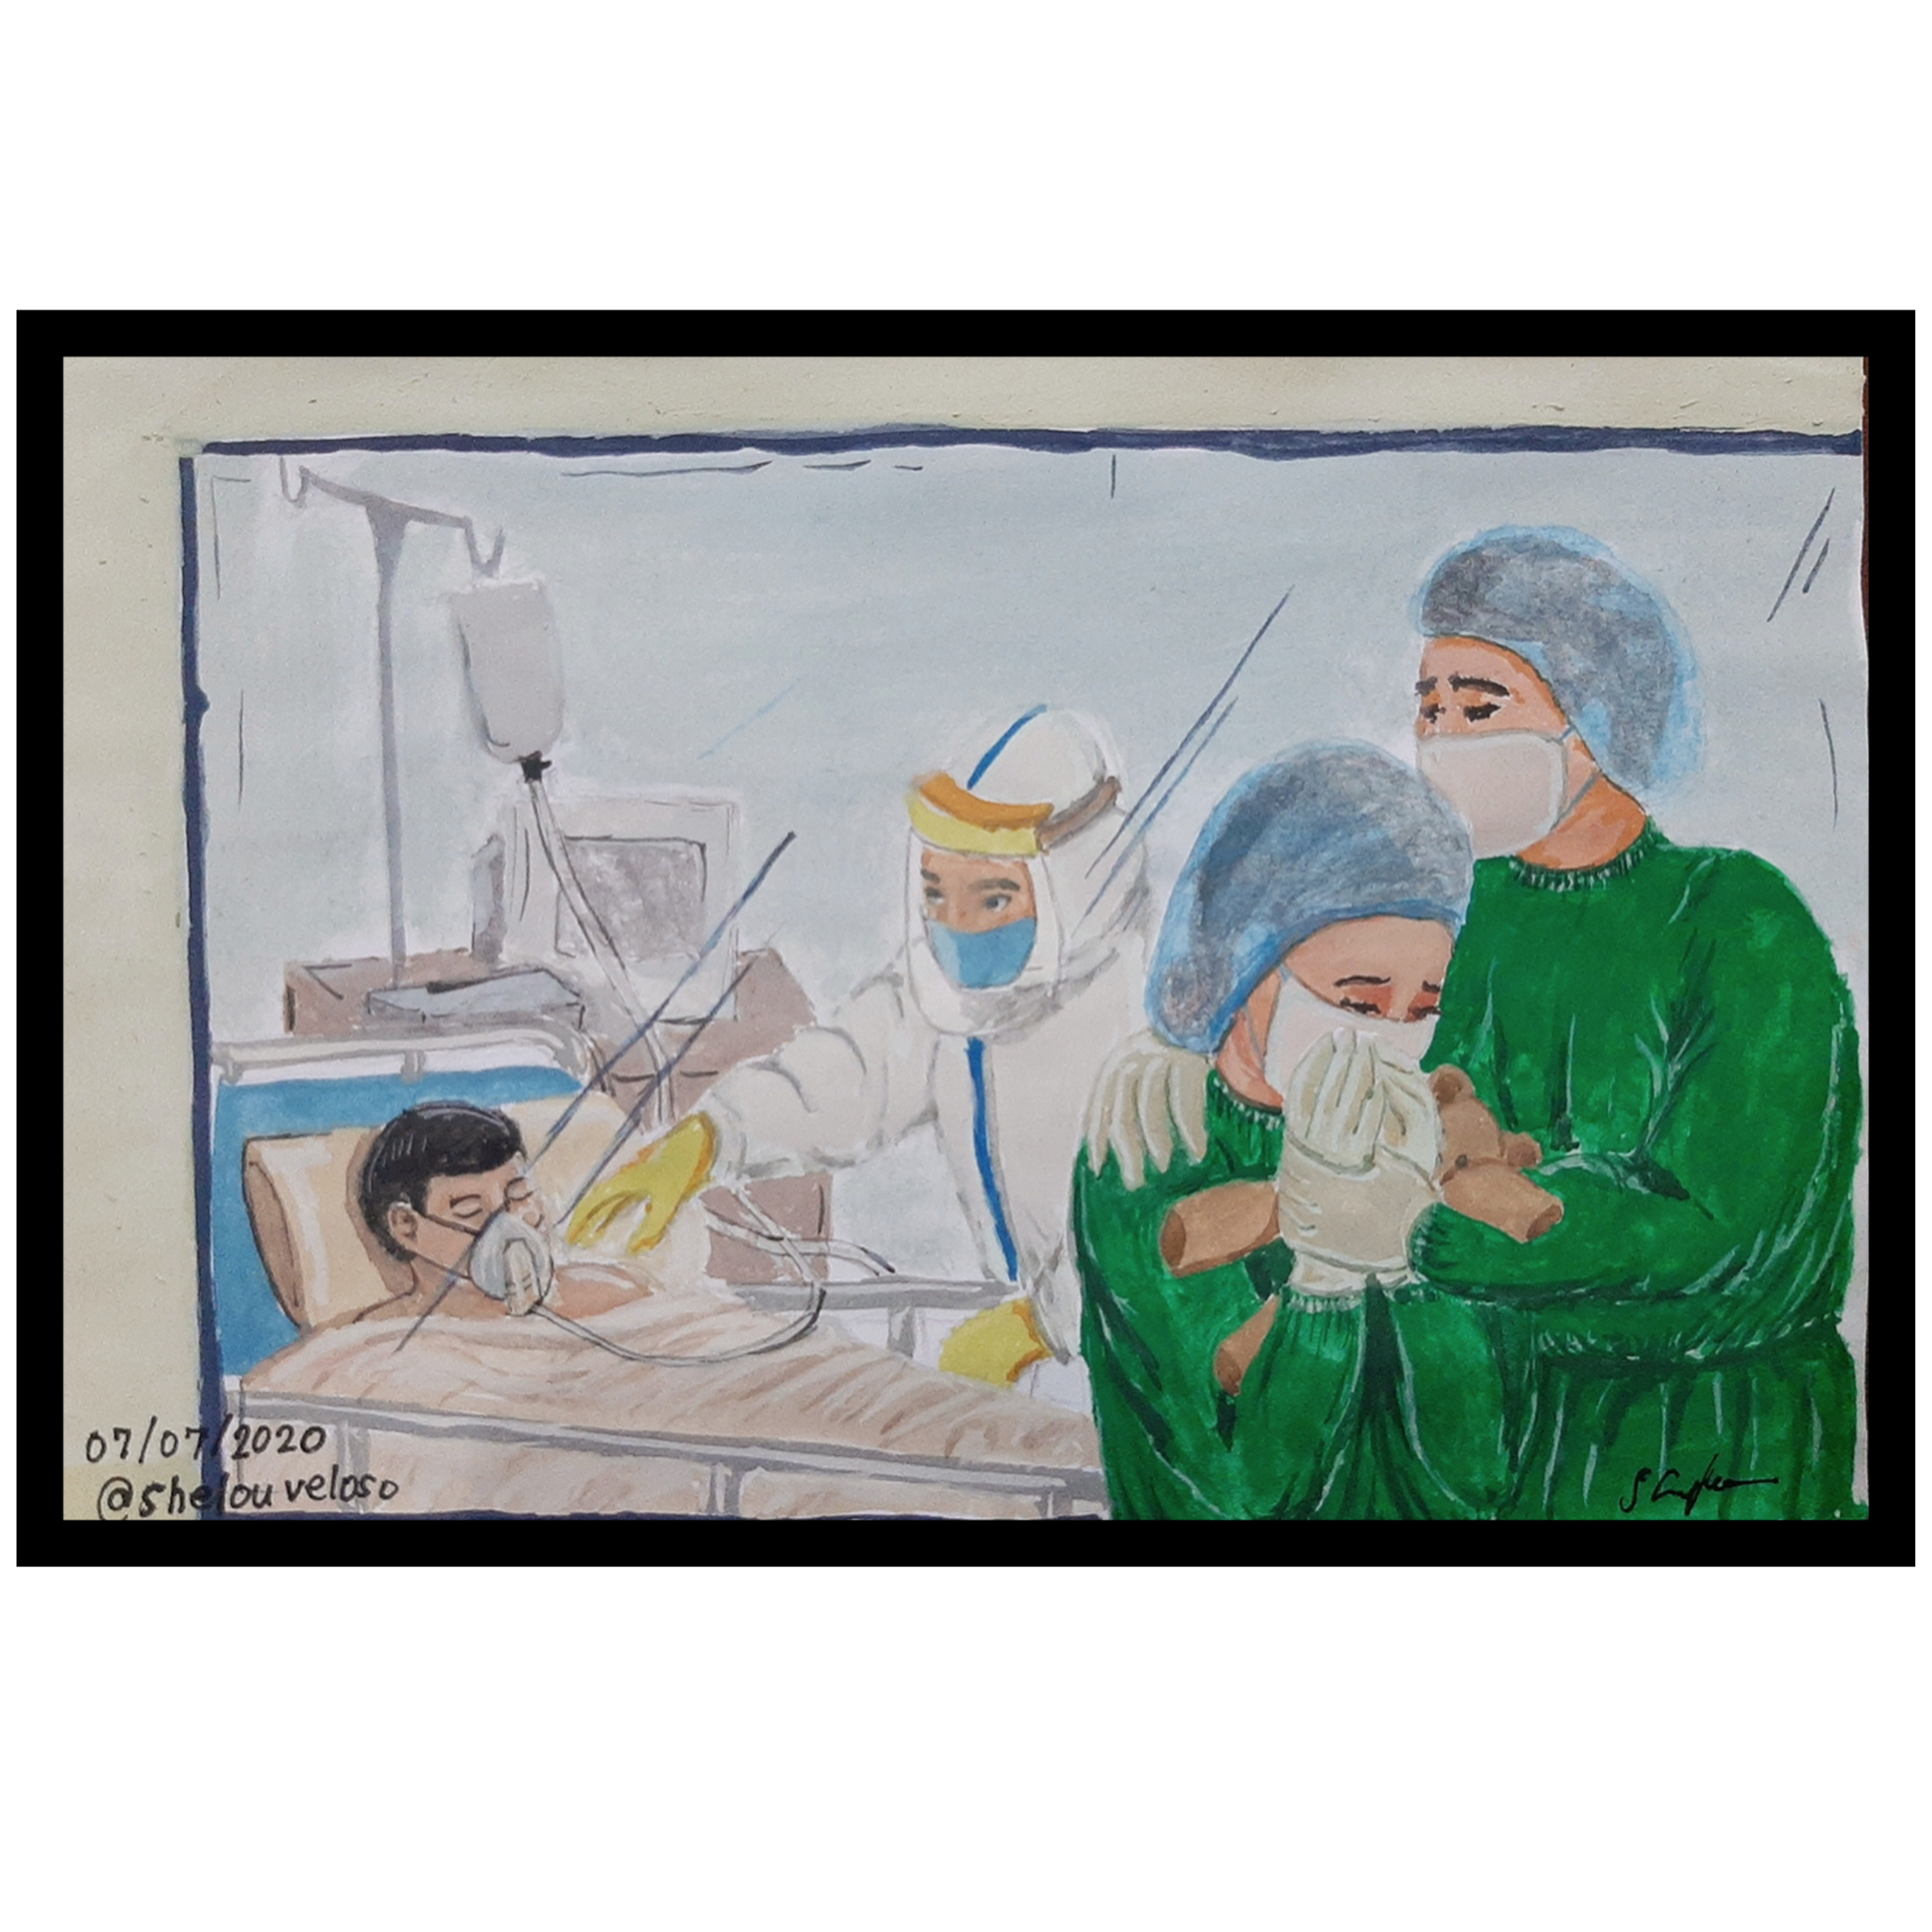 Artwork of the Day: Sad News at the Hospital - @shelouveloso